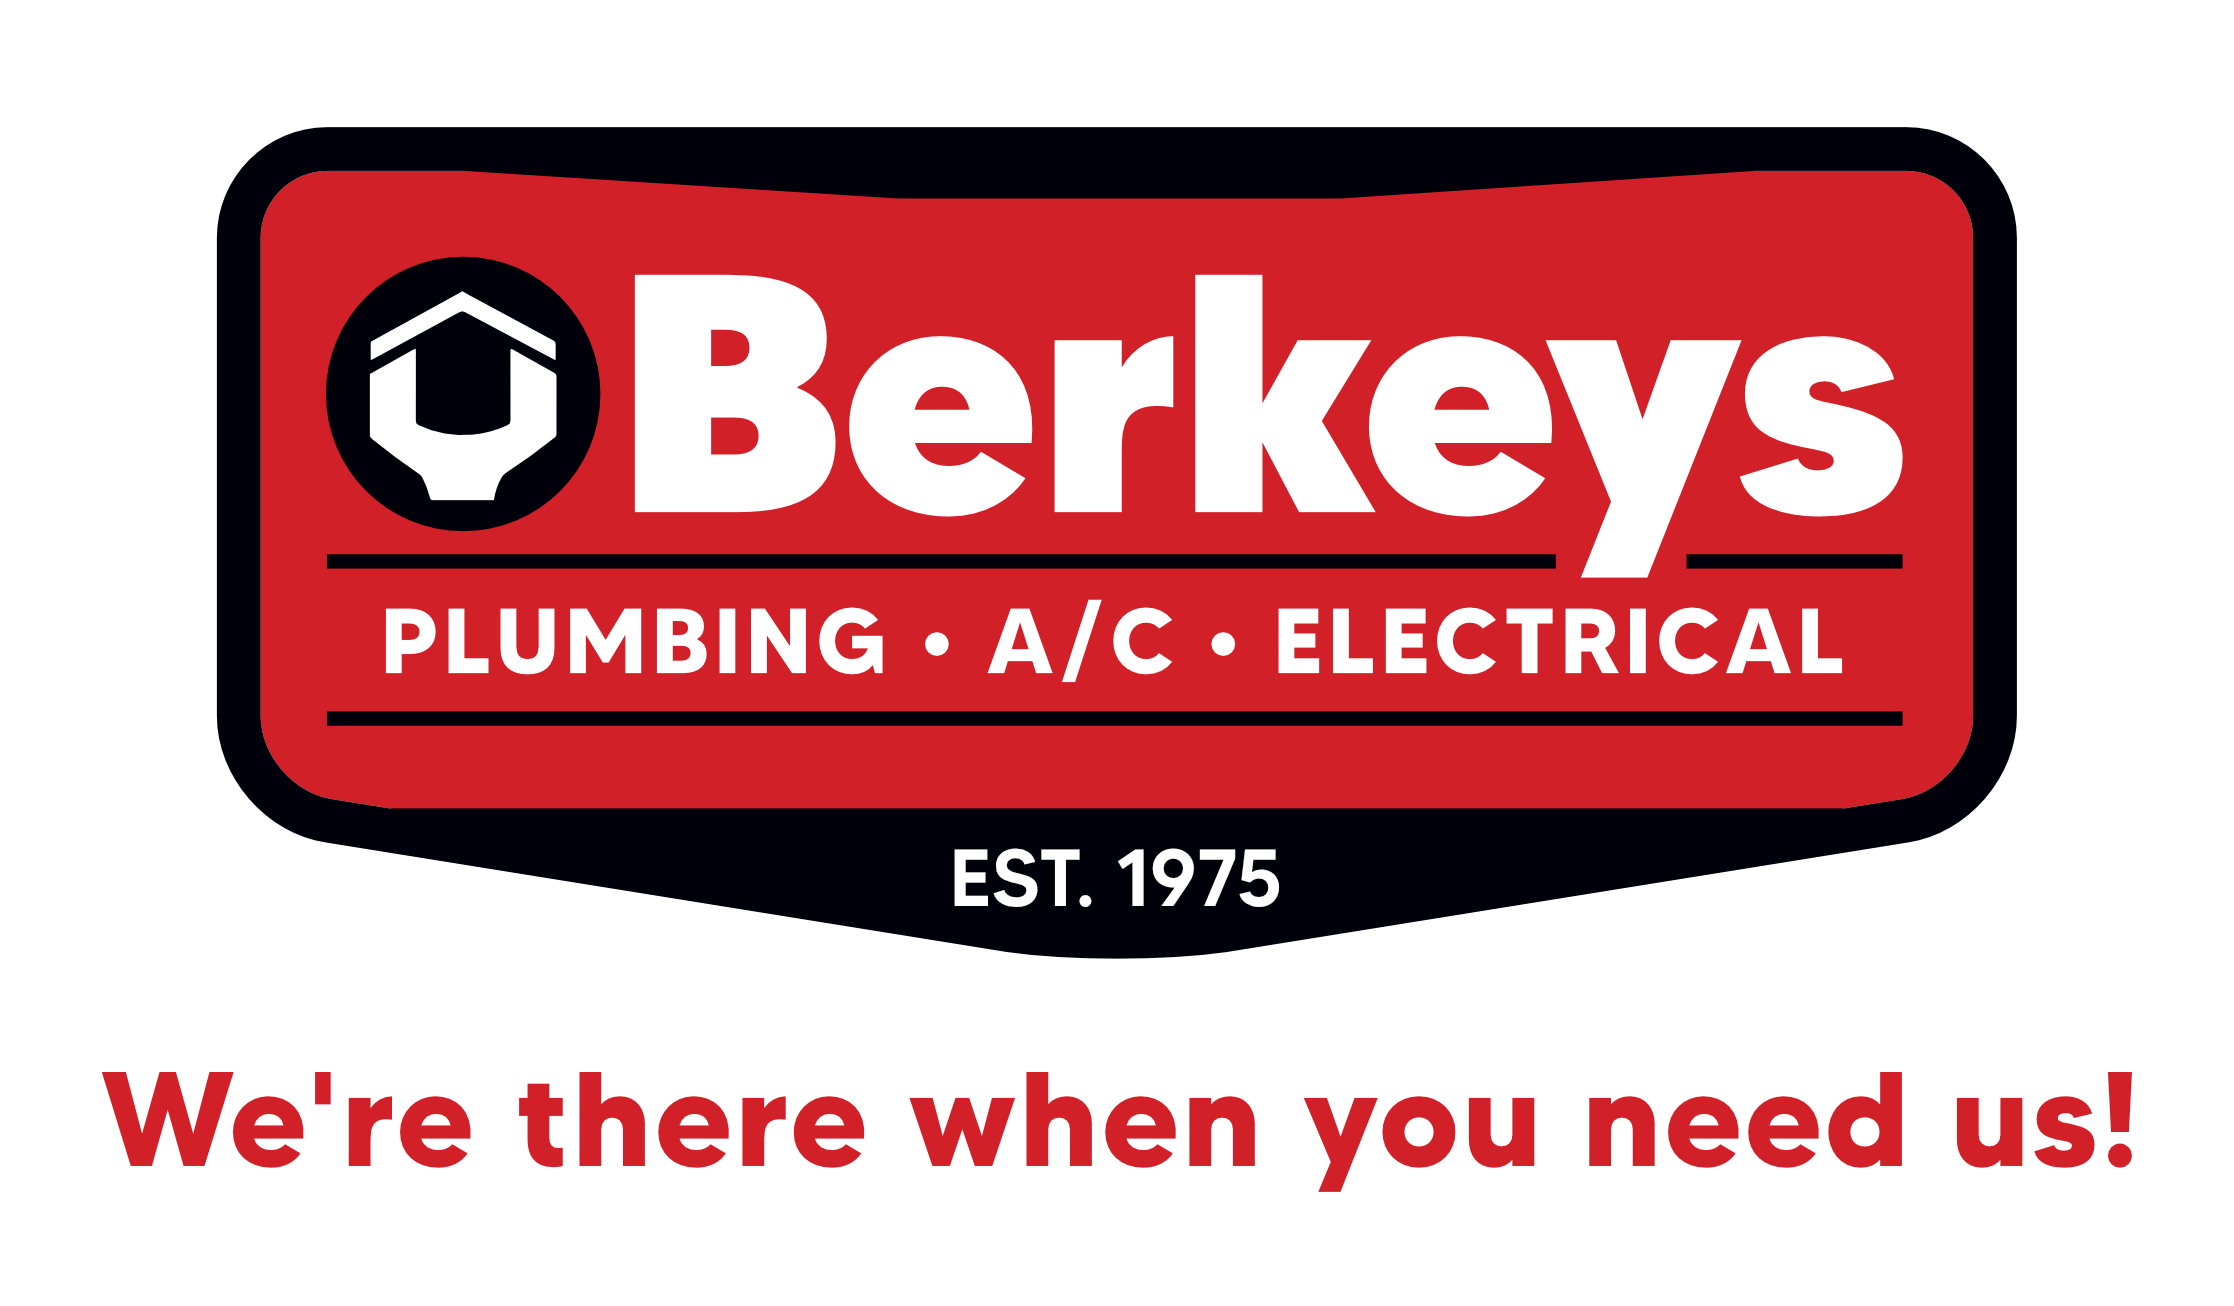 Hire an Electrician in Fairview